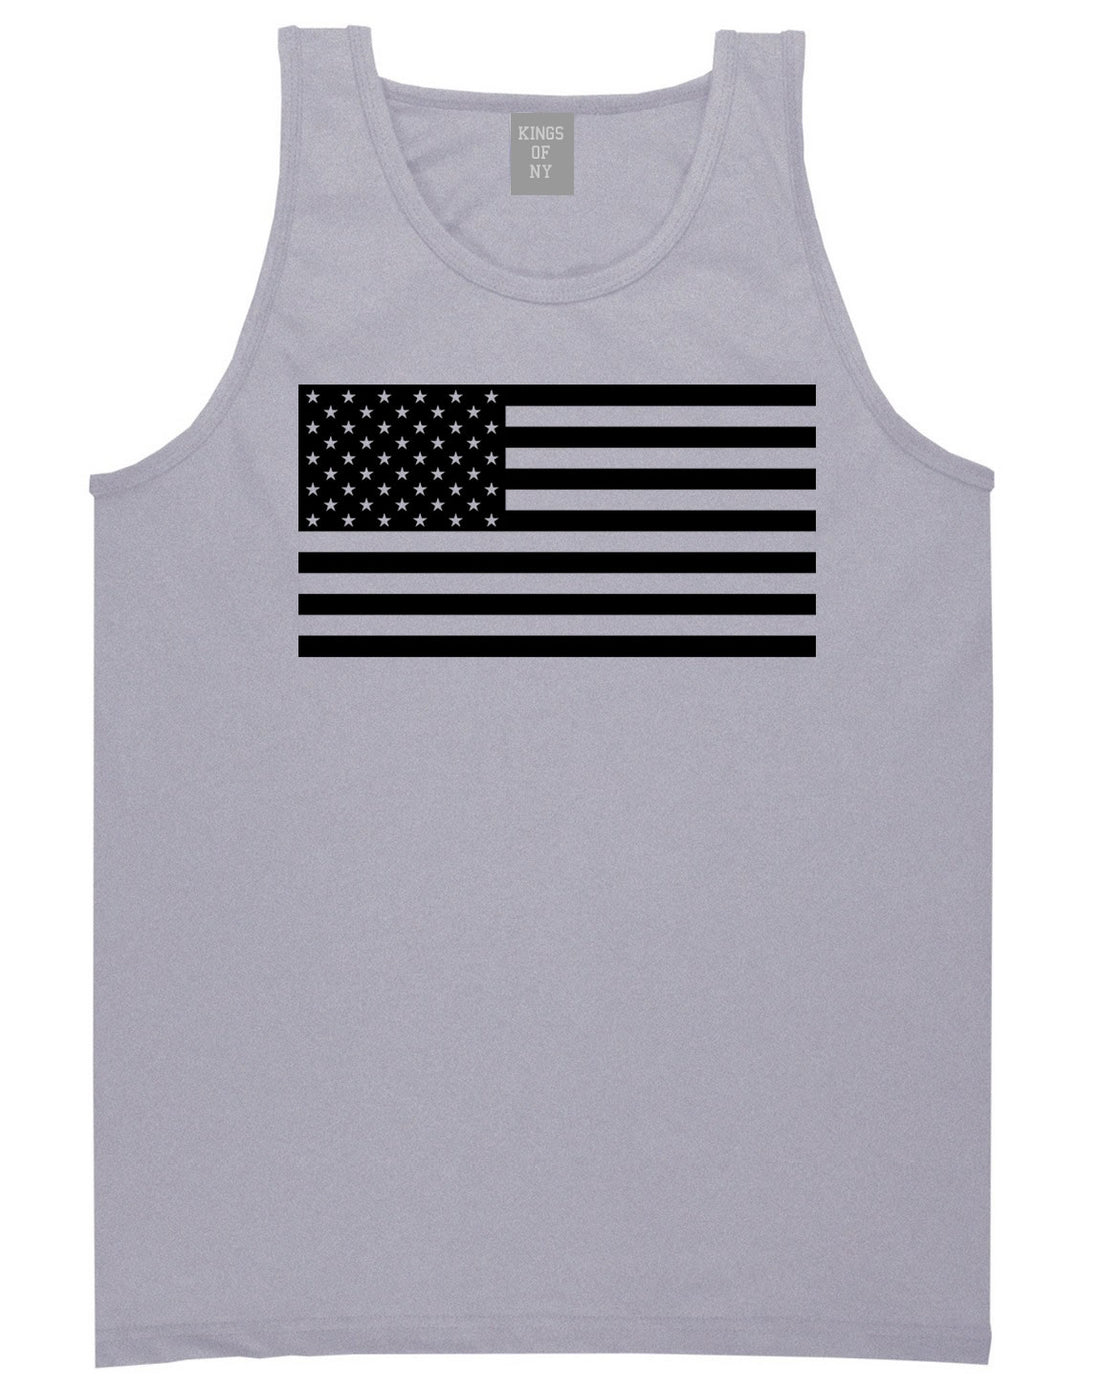 Kings Of NY American Flag Goth Style Tank Top in Grey